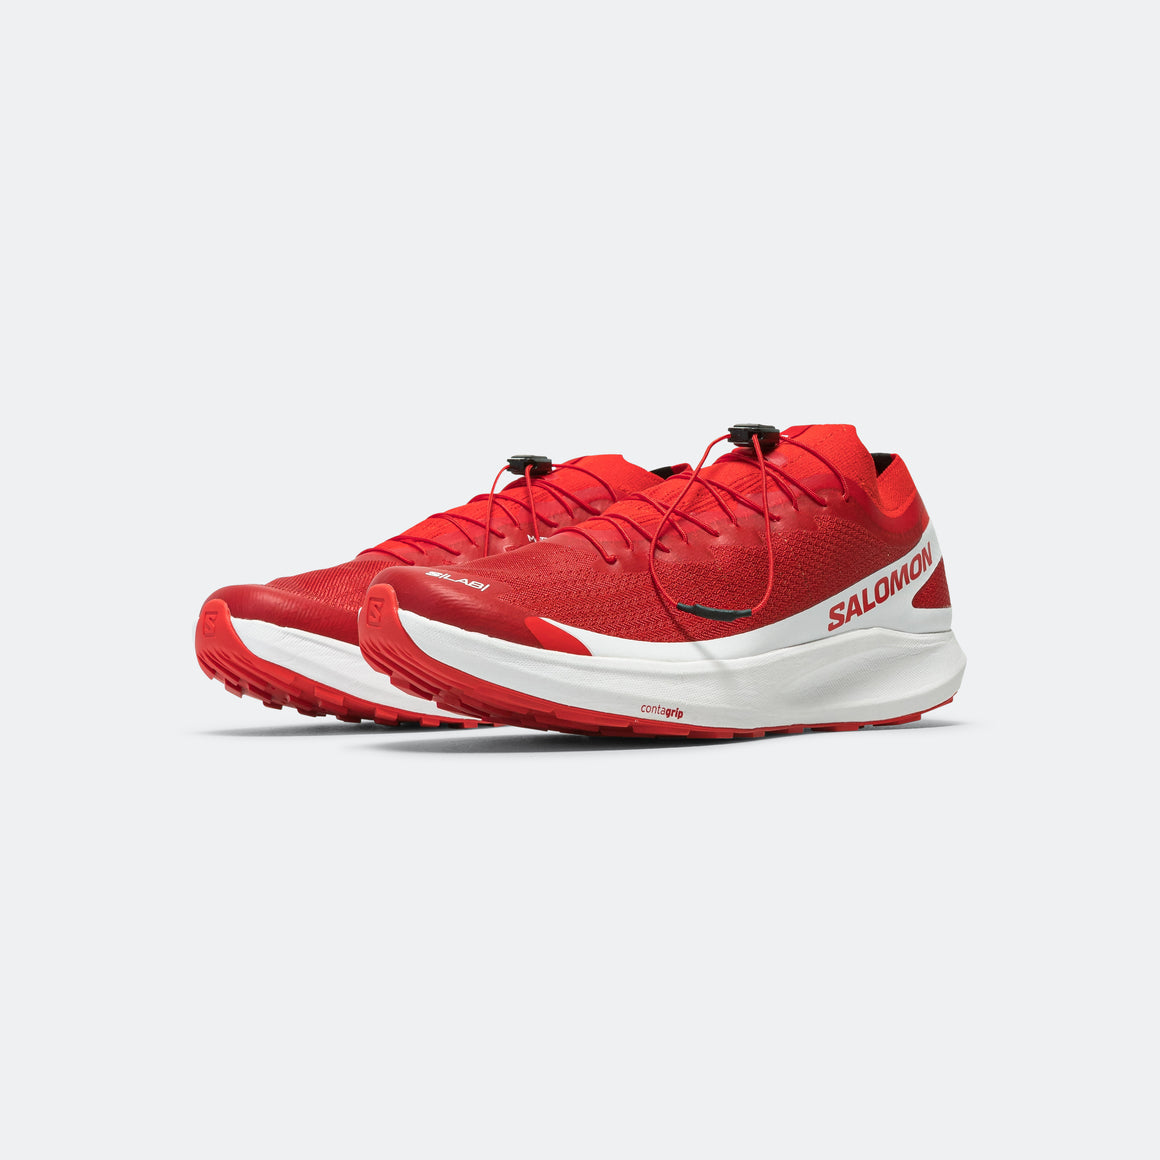 S/Lab Pulsar 2 - Fiery Red/White